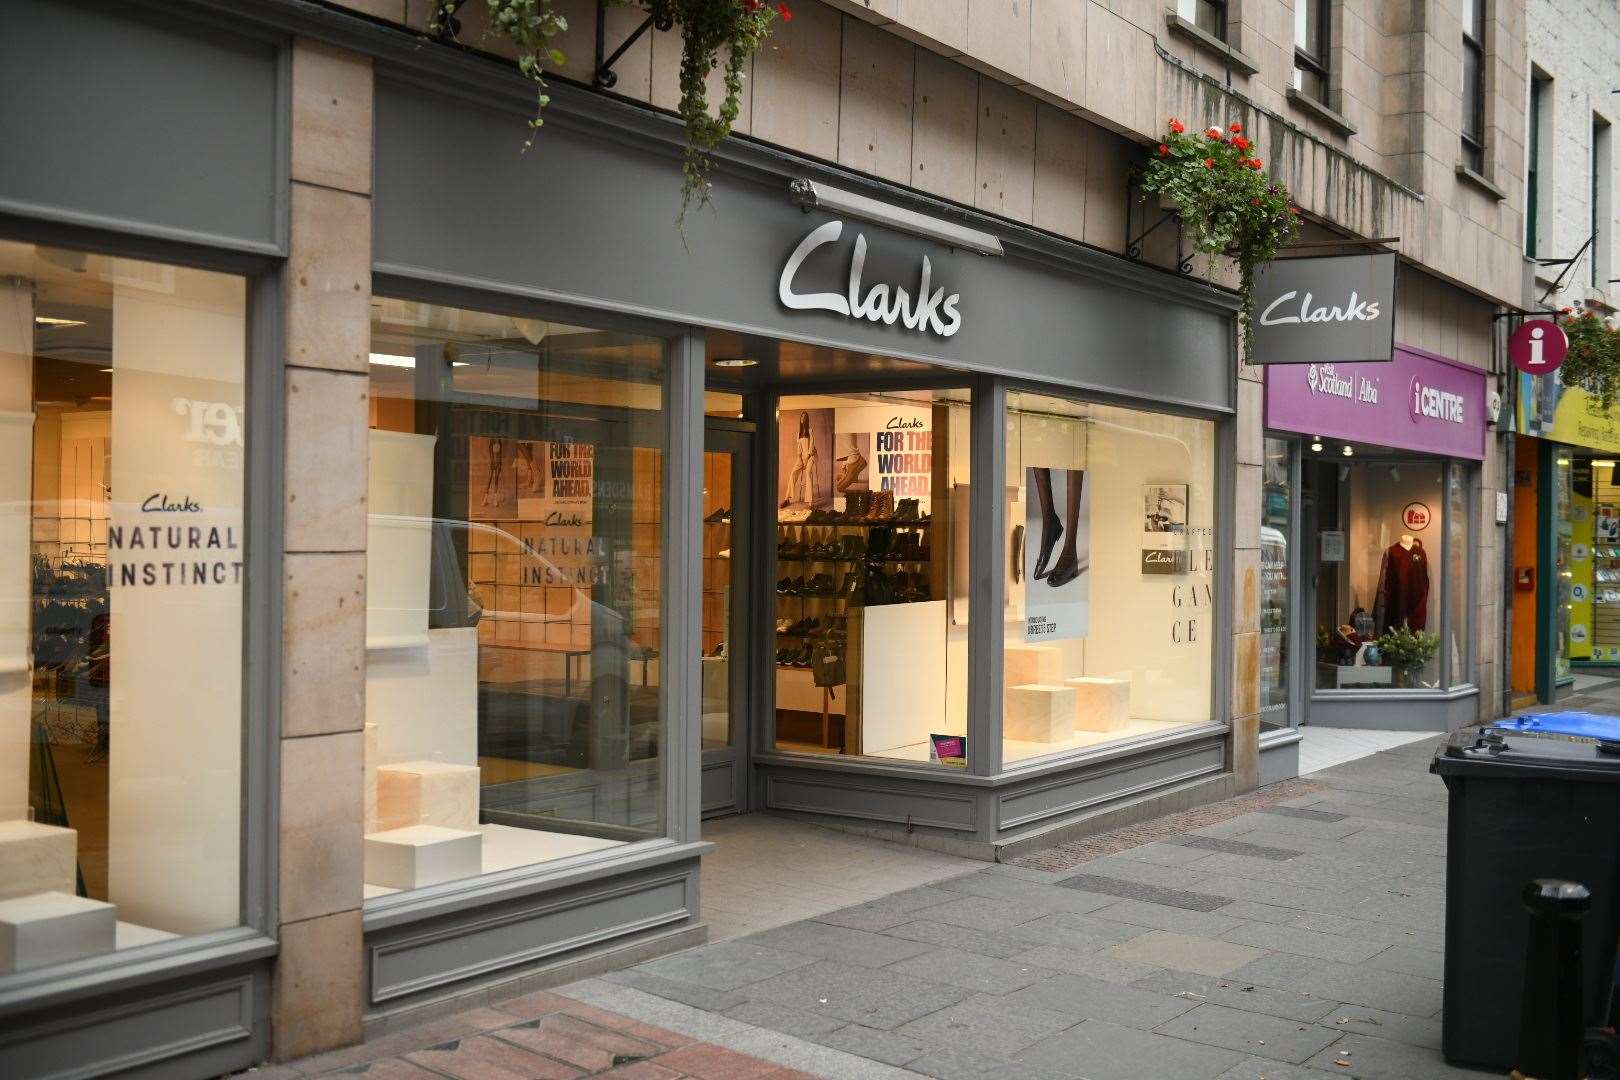 Clarks shoe shop in Inverness High Street will close at the end of this month.